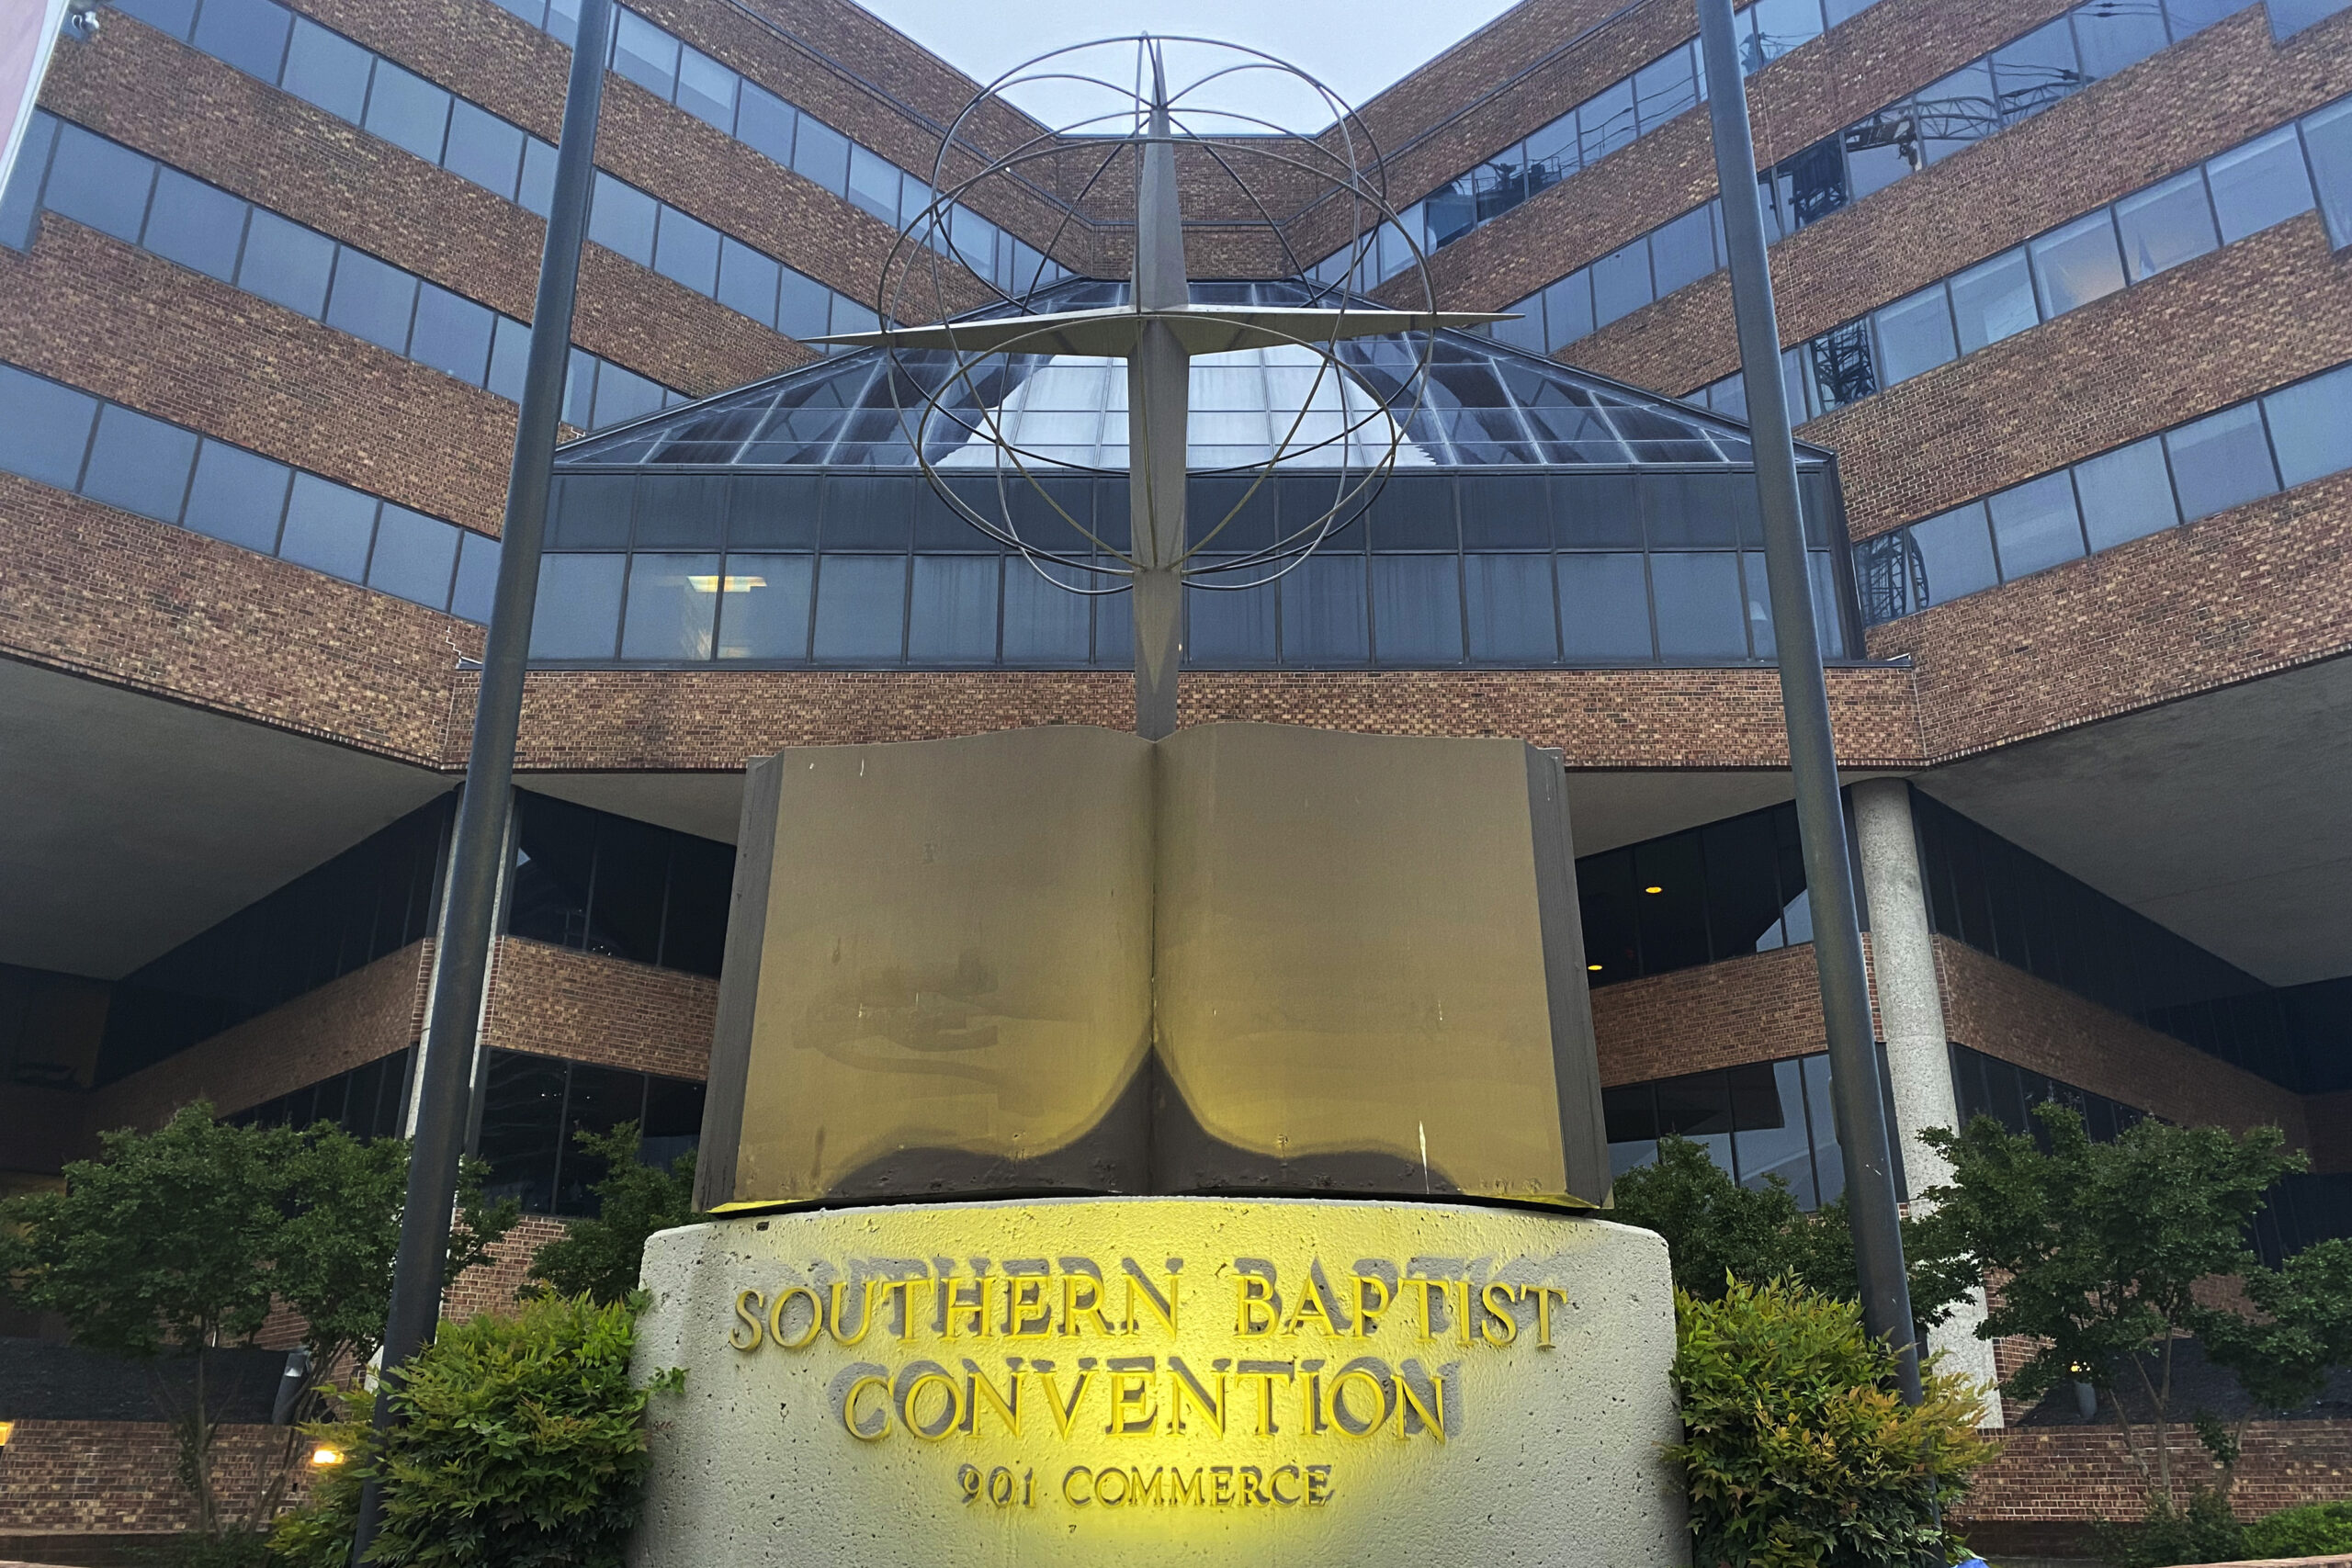 FILE - A cross and Bible sculpture stand outside the Southern Baptist Convention headquarters in Nashville, Tenn., May 24, 2022. A powerful Southern Baptist committee was looking to appoint a new leader Monday, May 1, 2023, who could navigate controversies over its handling of sexual-abuse reforms and the ousting of churches with women serving as pastors. Instead, the Executive Committee found itself tangled in yet another dispute, voting down a recommendation to make its own former chairman its president in what had become a racially fraught decision. (AP Photo/Holly Meyer, File)